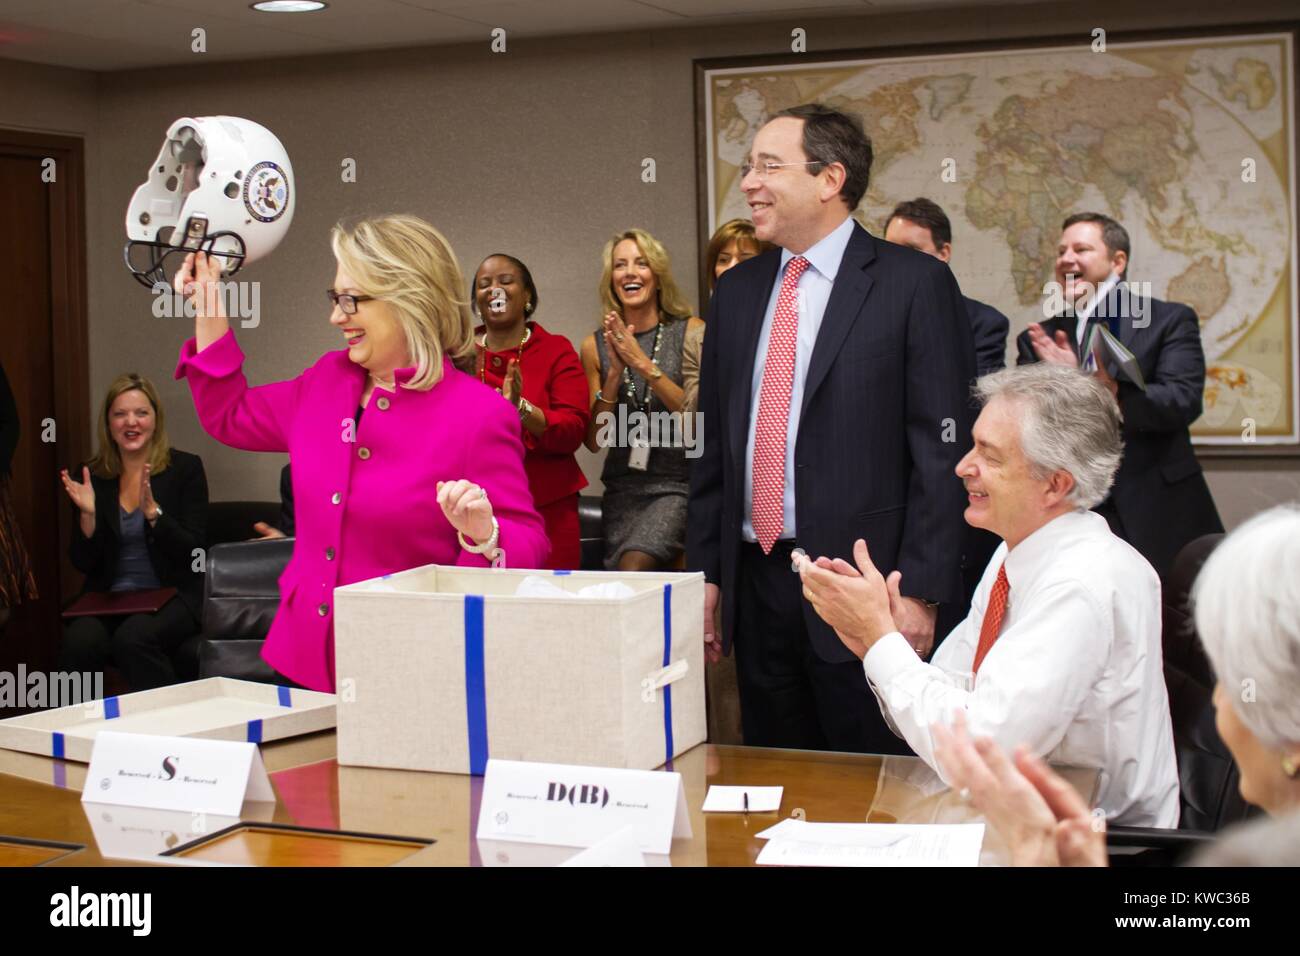 U.S. Sec. of State Hillary Clinton is presented with a football helmet at the State Department. Jan. 7, 2013 was her first day back to work after her head injury of Dec. 11, 2012. (BSLOC 2015 13 233) Stock Photo